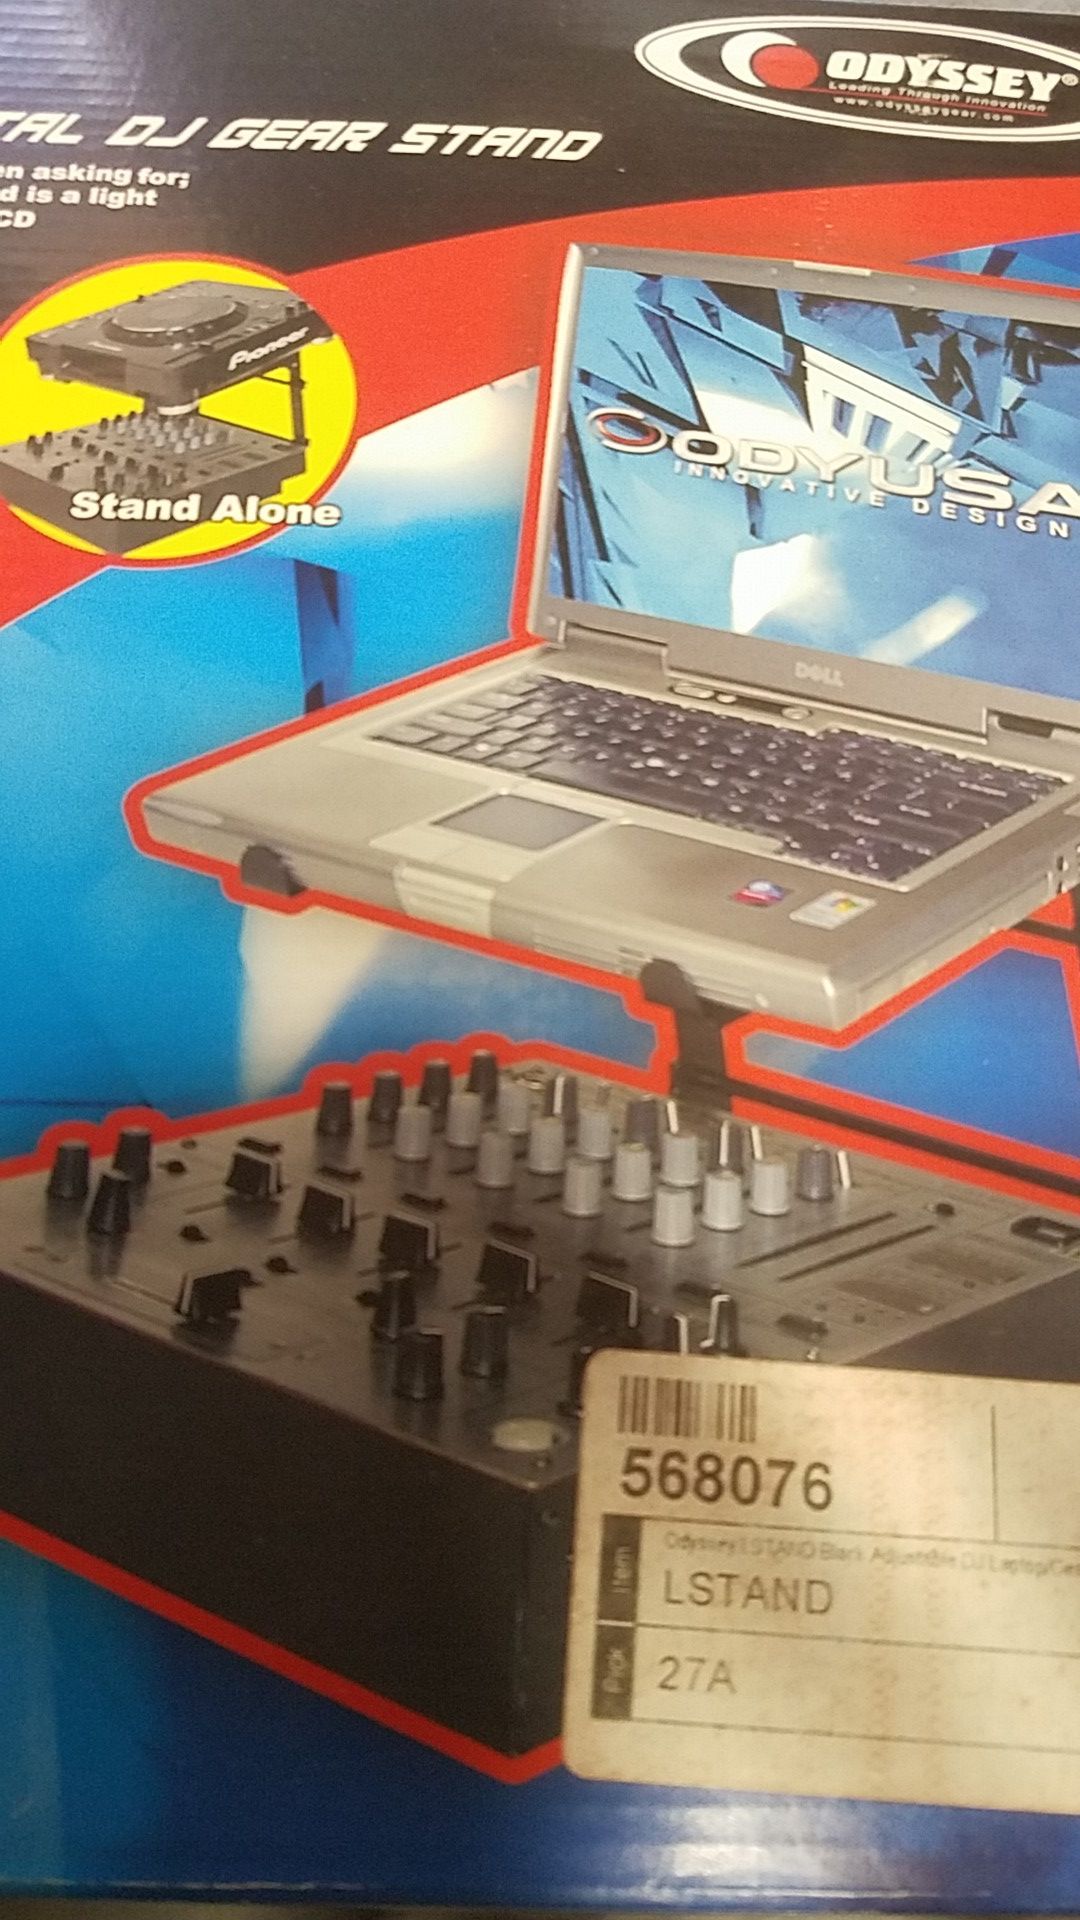 Dj laptop stand new in box